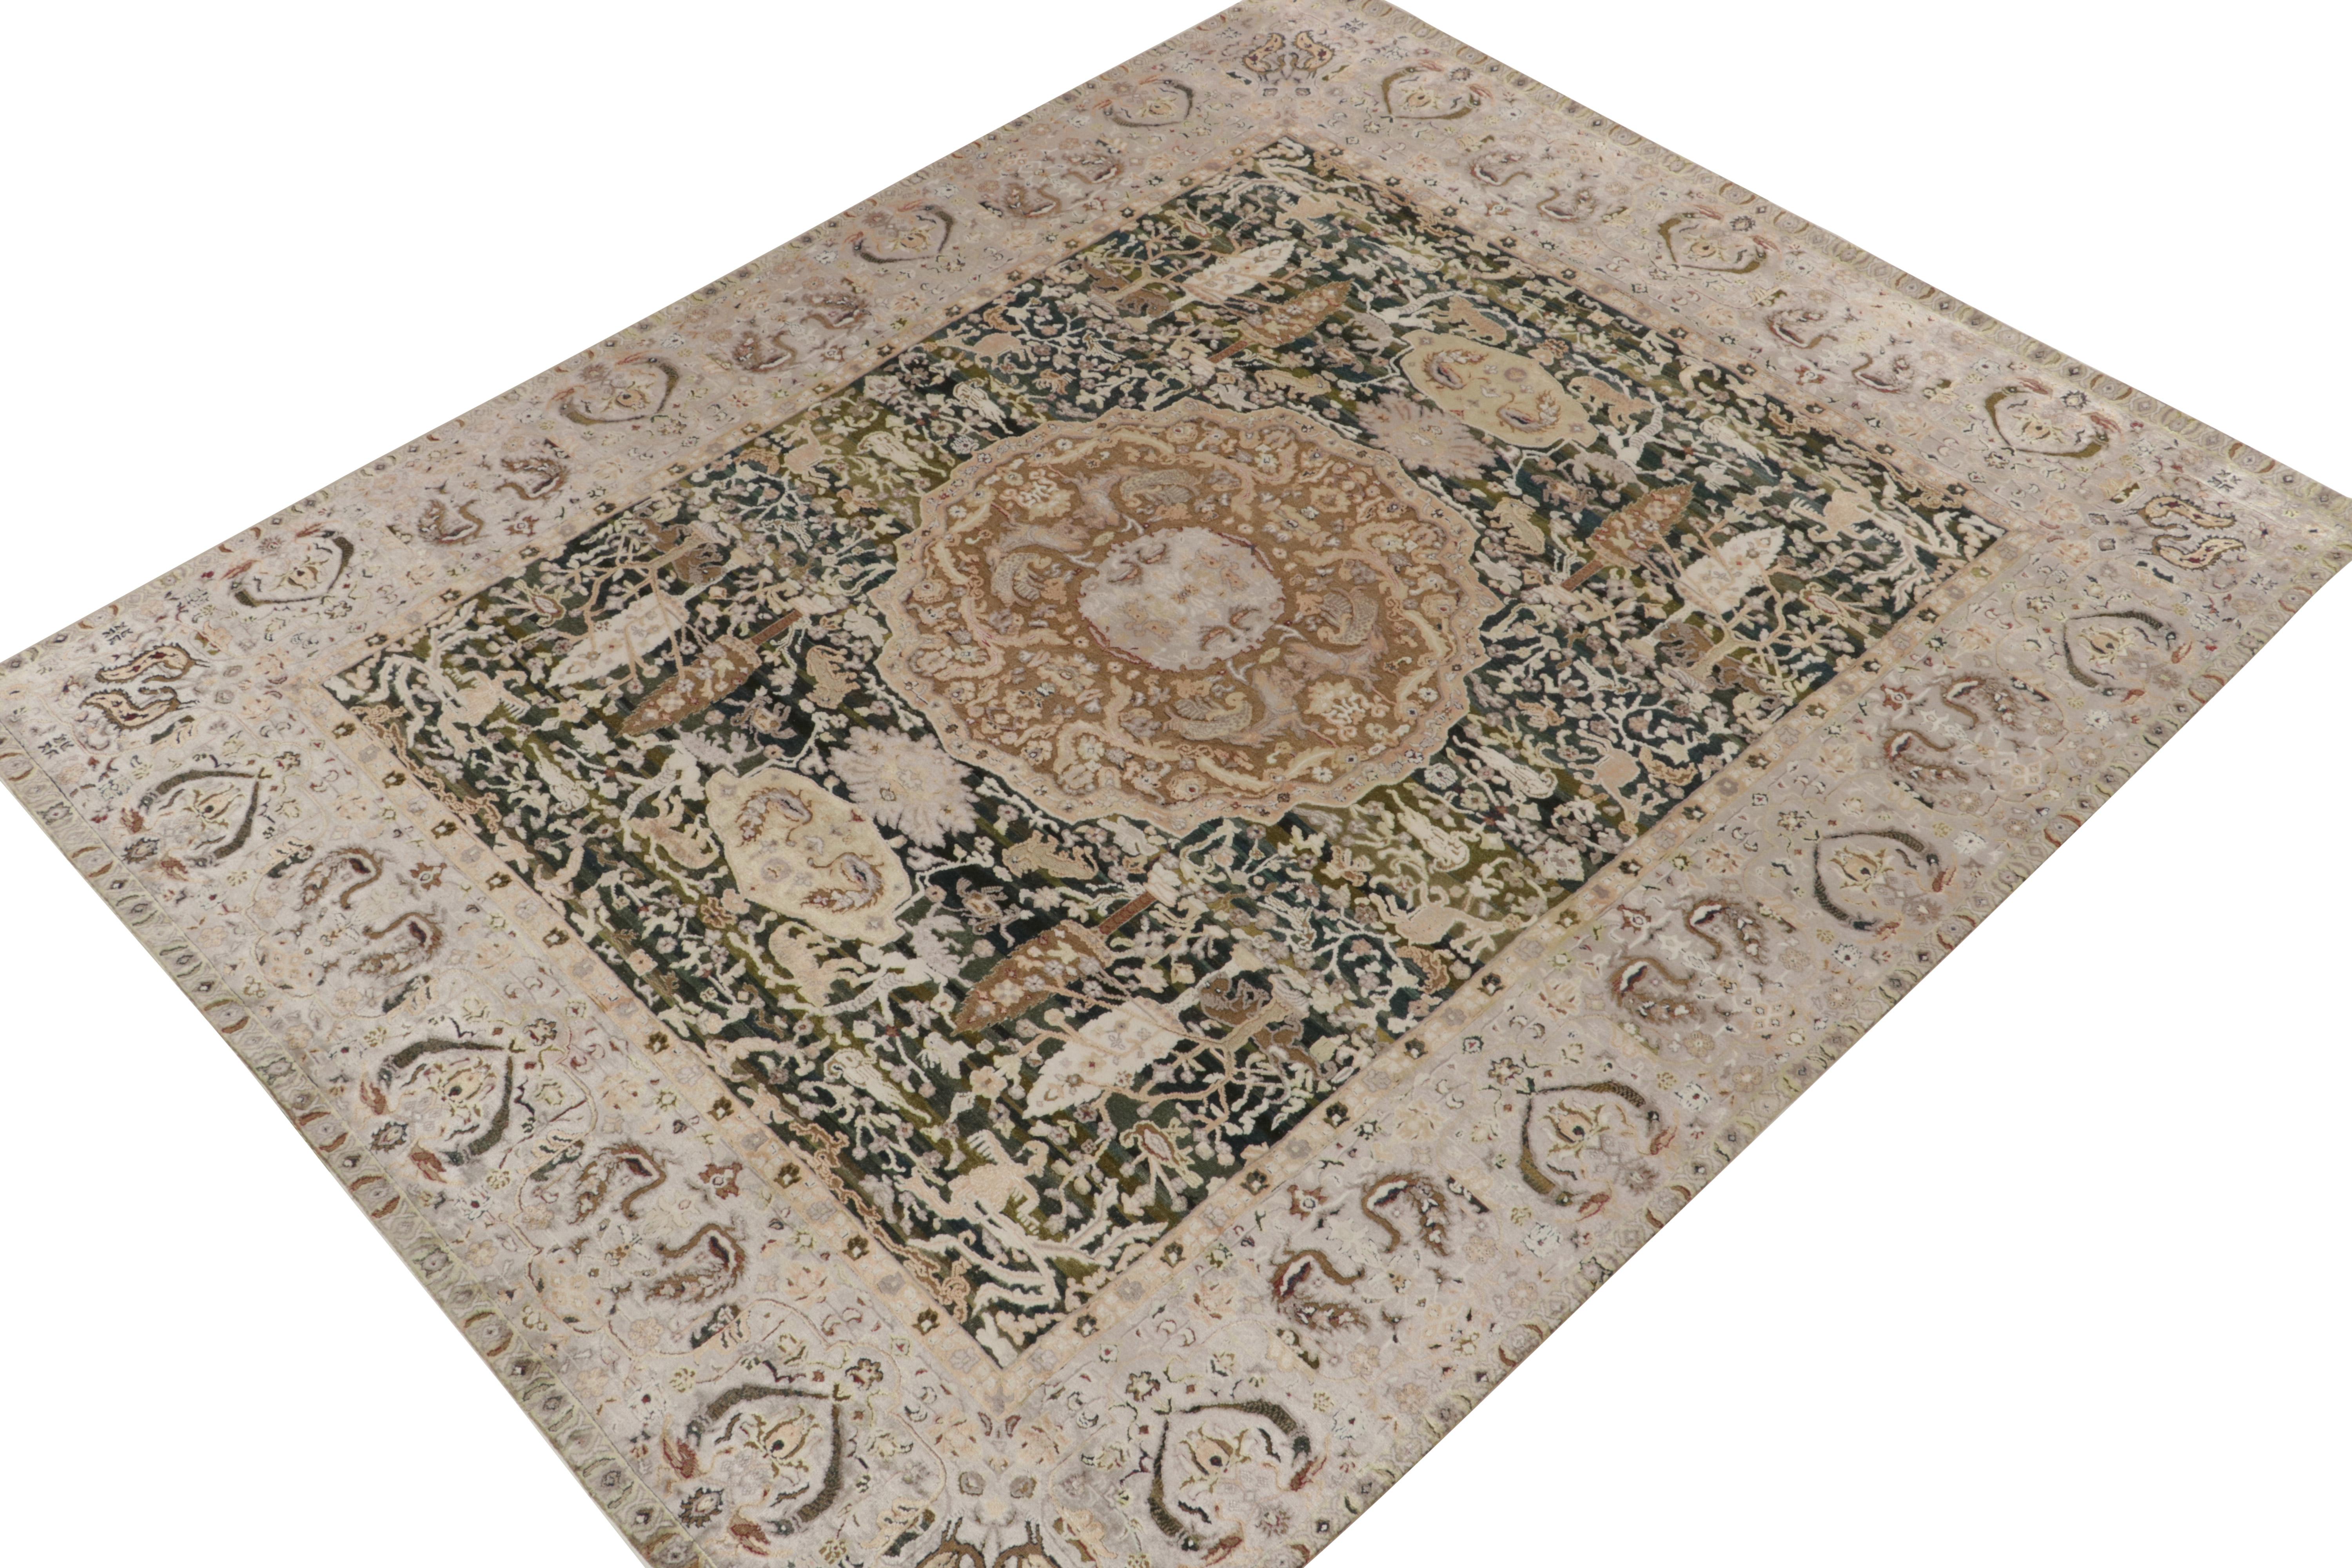 Hand-knotted in fine quality wool & silk, a gorgeous circle rug inspired by 19th century Persian masterpieces of rare provenance.

New to our Modern Classics collection, this particular work is believed to have been initiated by a German designer